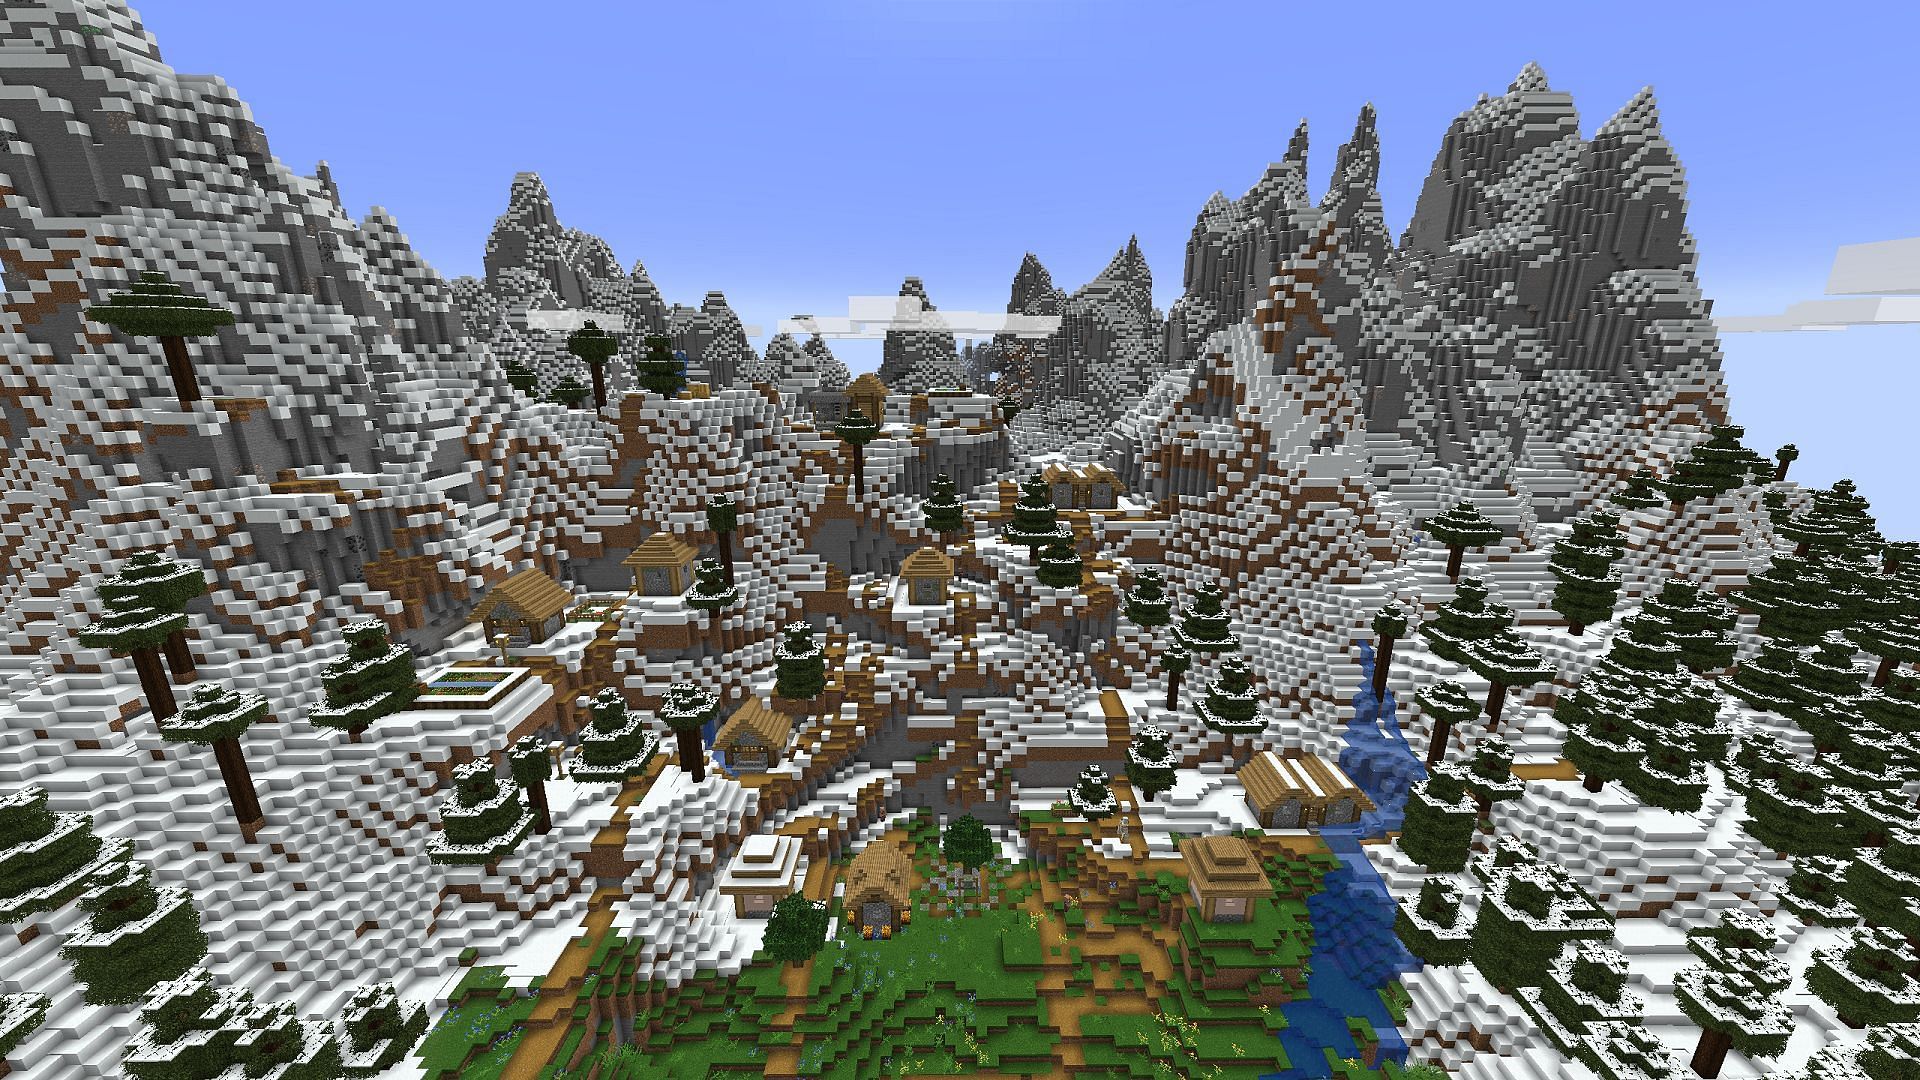 This Minecraft village is constructed in a terraced style along the slope of a mountain (Image via Fortunehoe/Reddit)